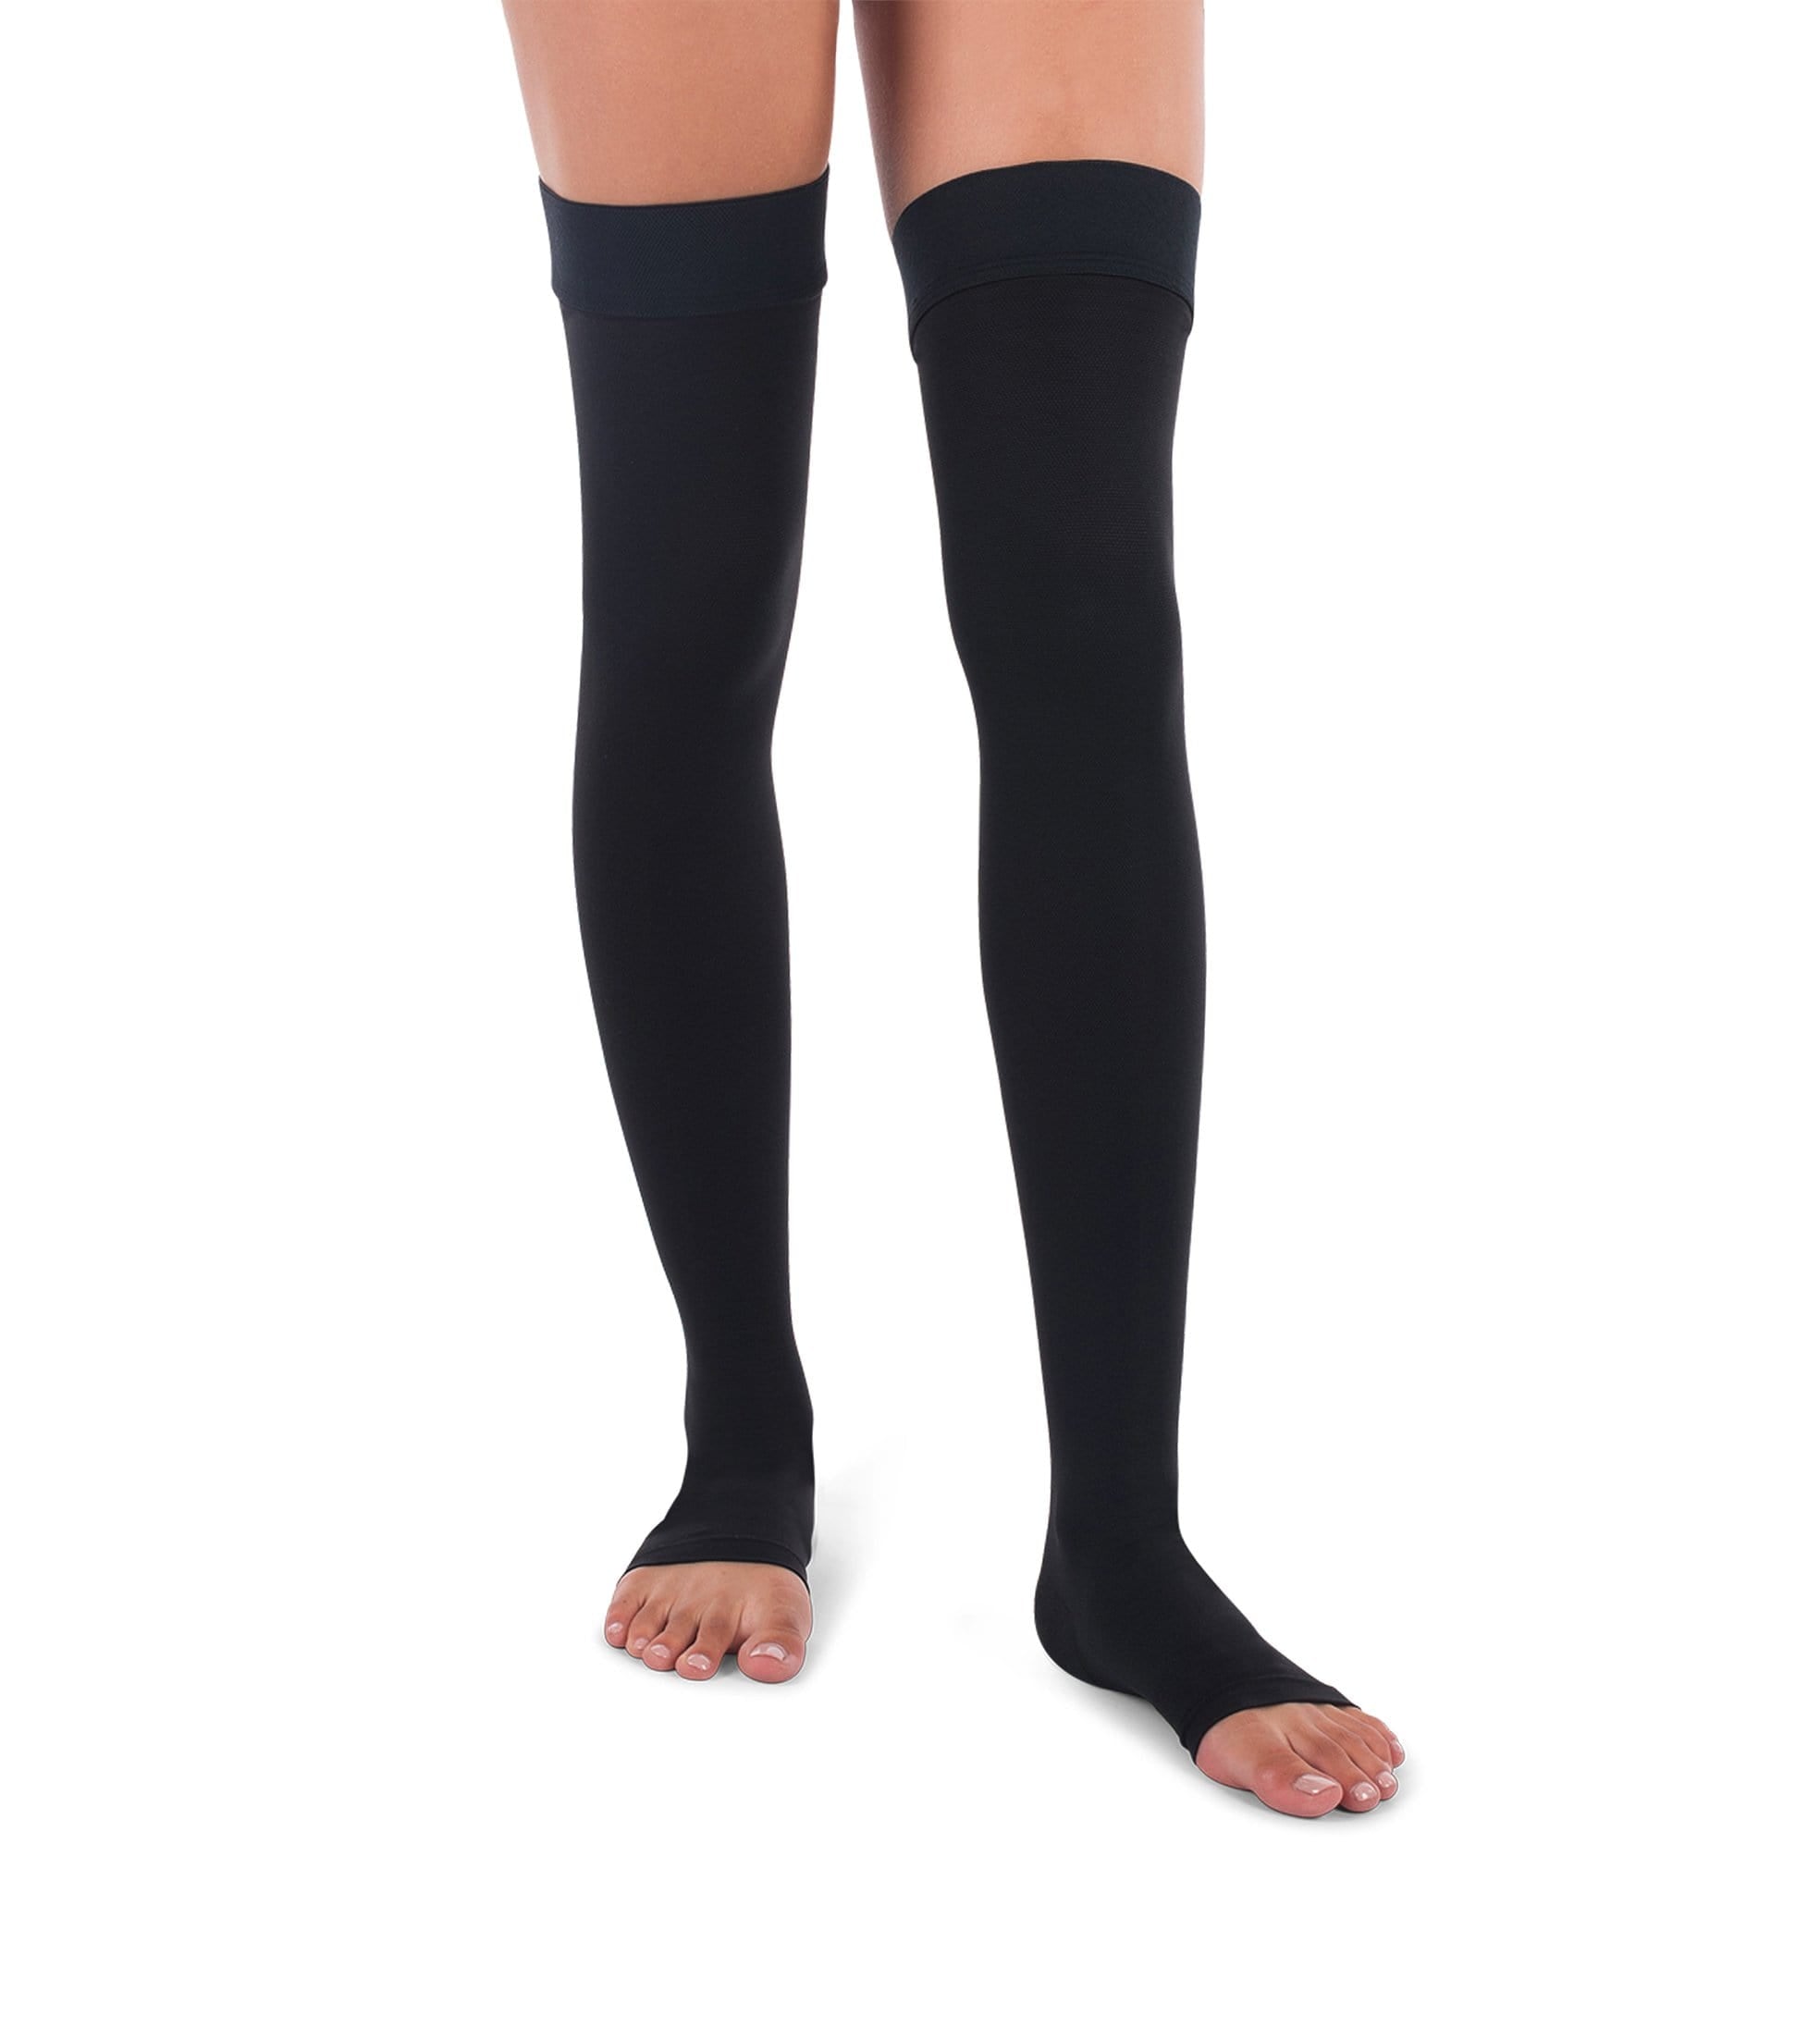 JOMI Thigh High Compression Stockings, 30-40mmHg Surgical Weight Open Toe  341